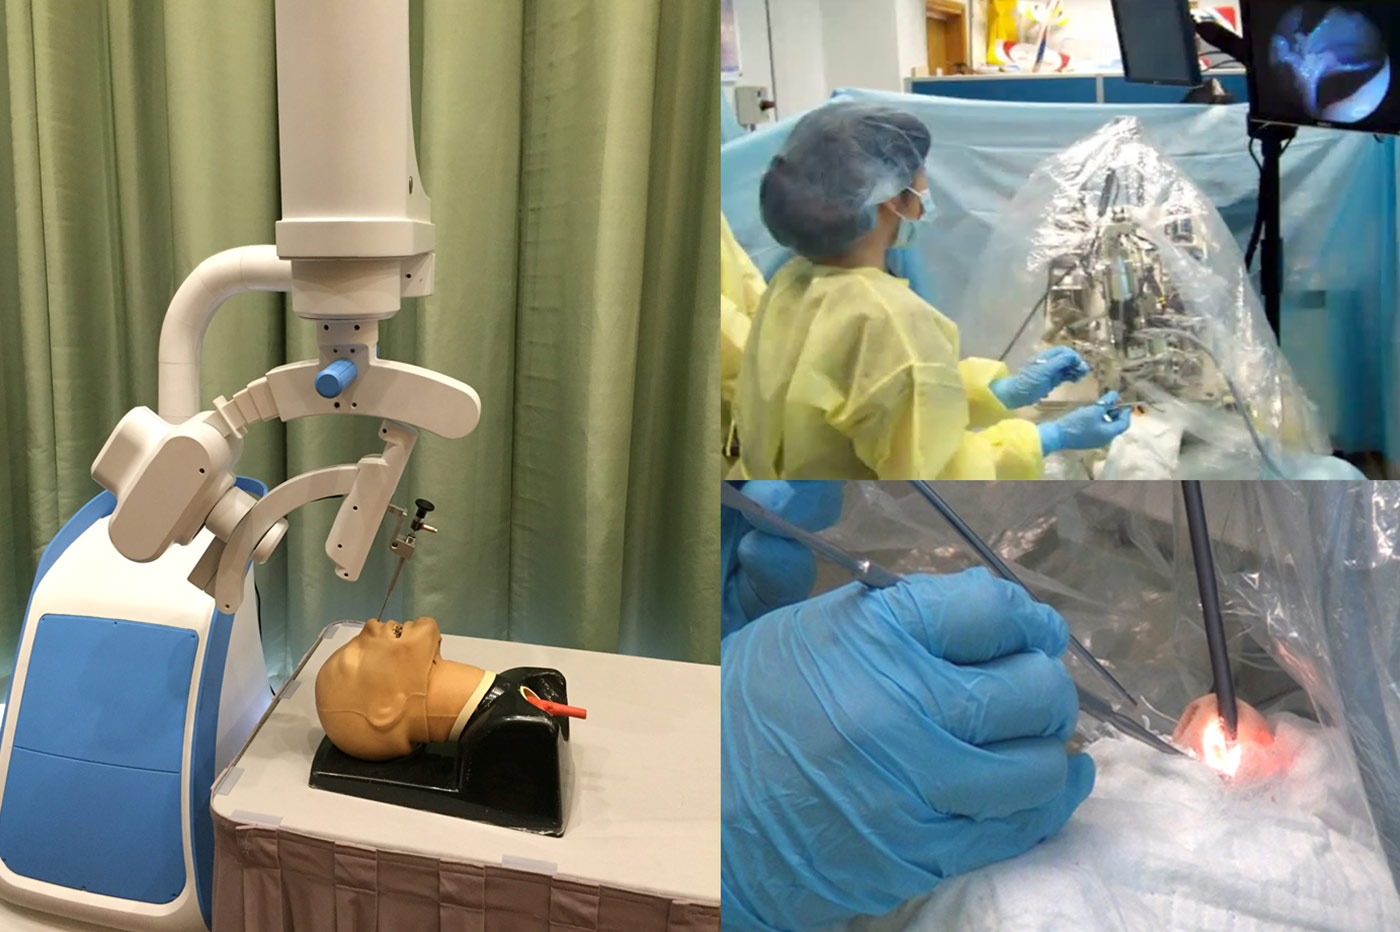 One surgery robot helps with nasal surgery by maneuvering an endoscope mechanically